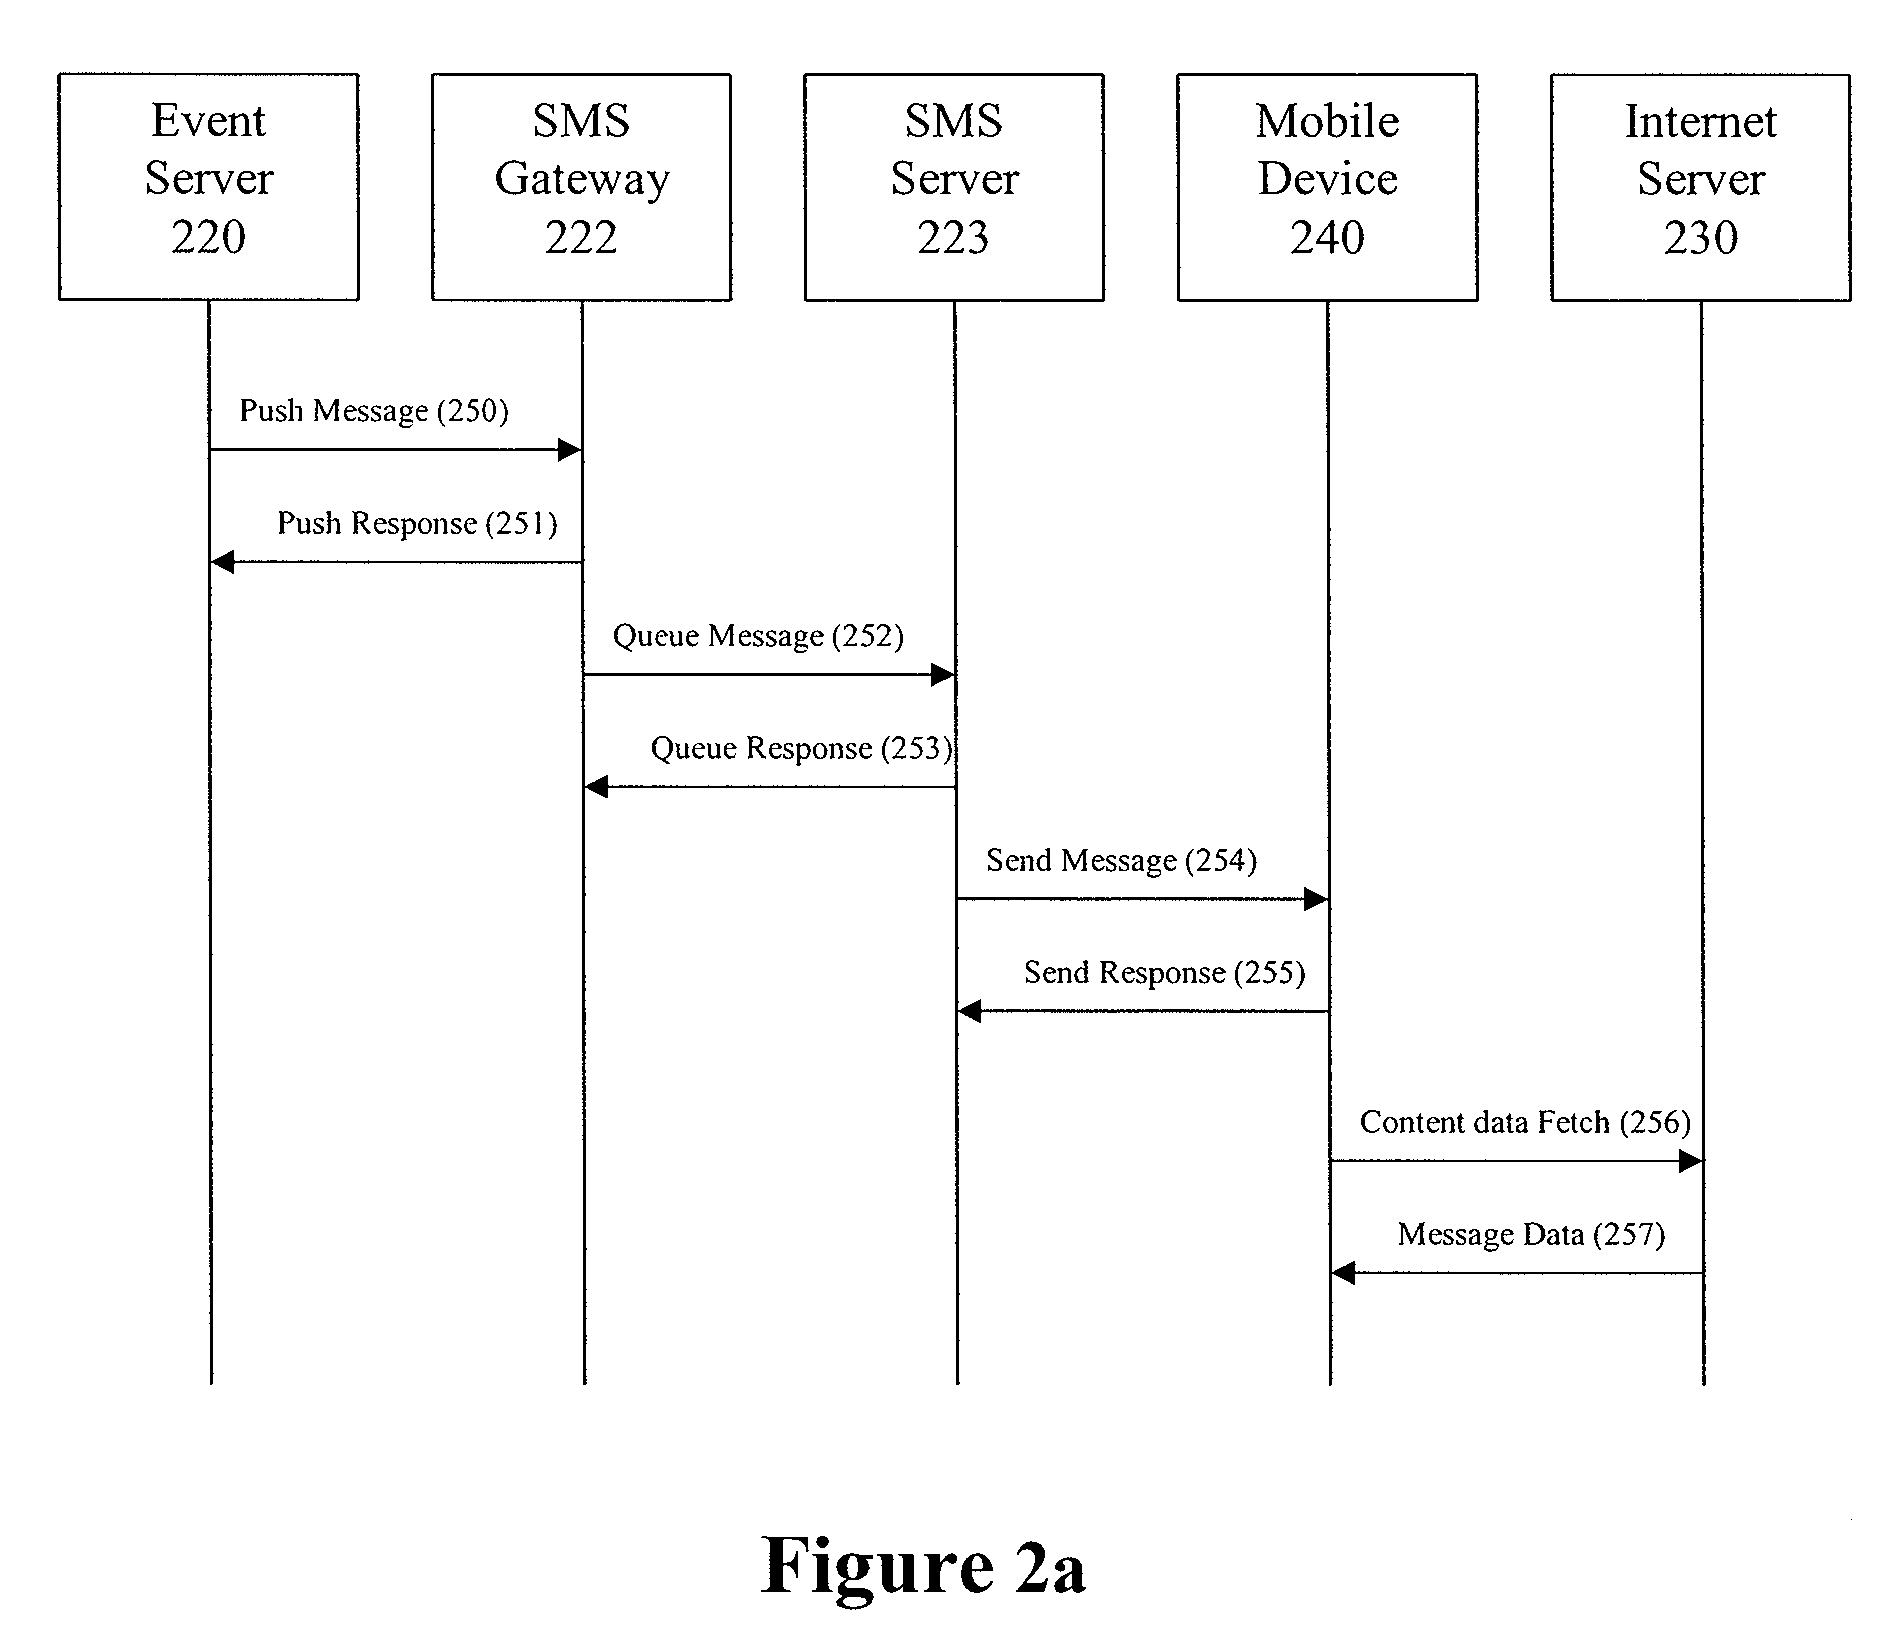 Message push with pull of information to a communications computing device